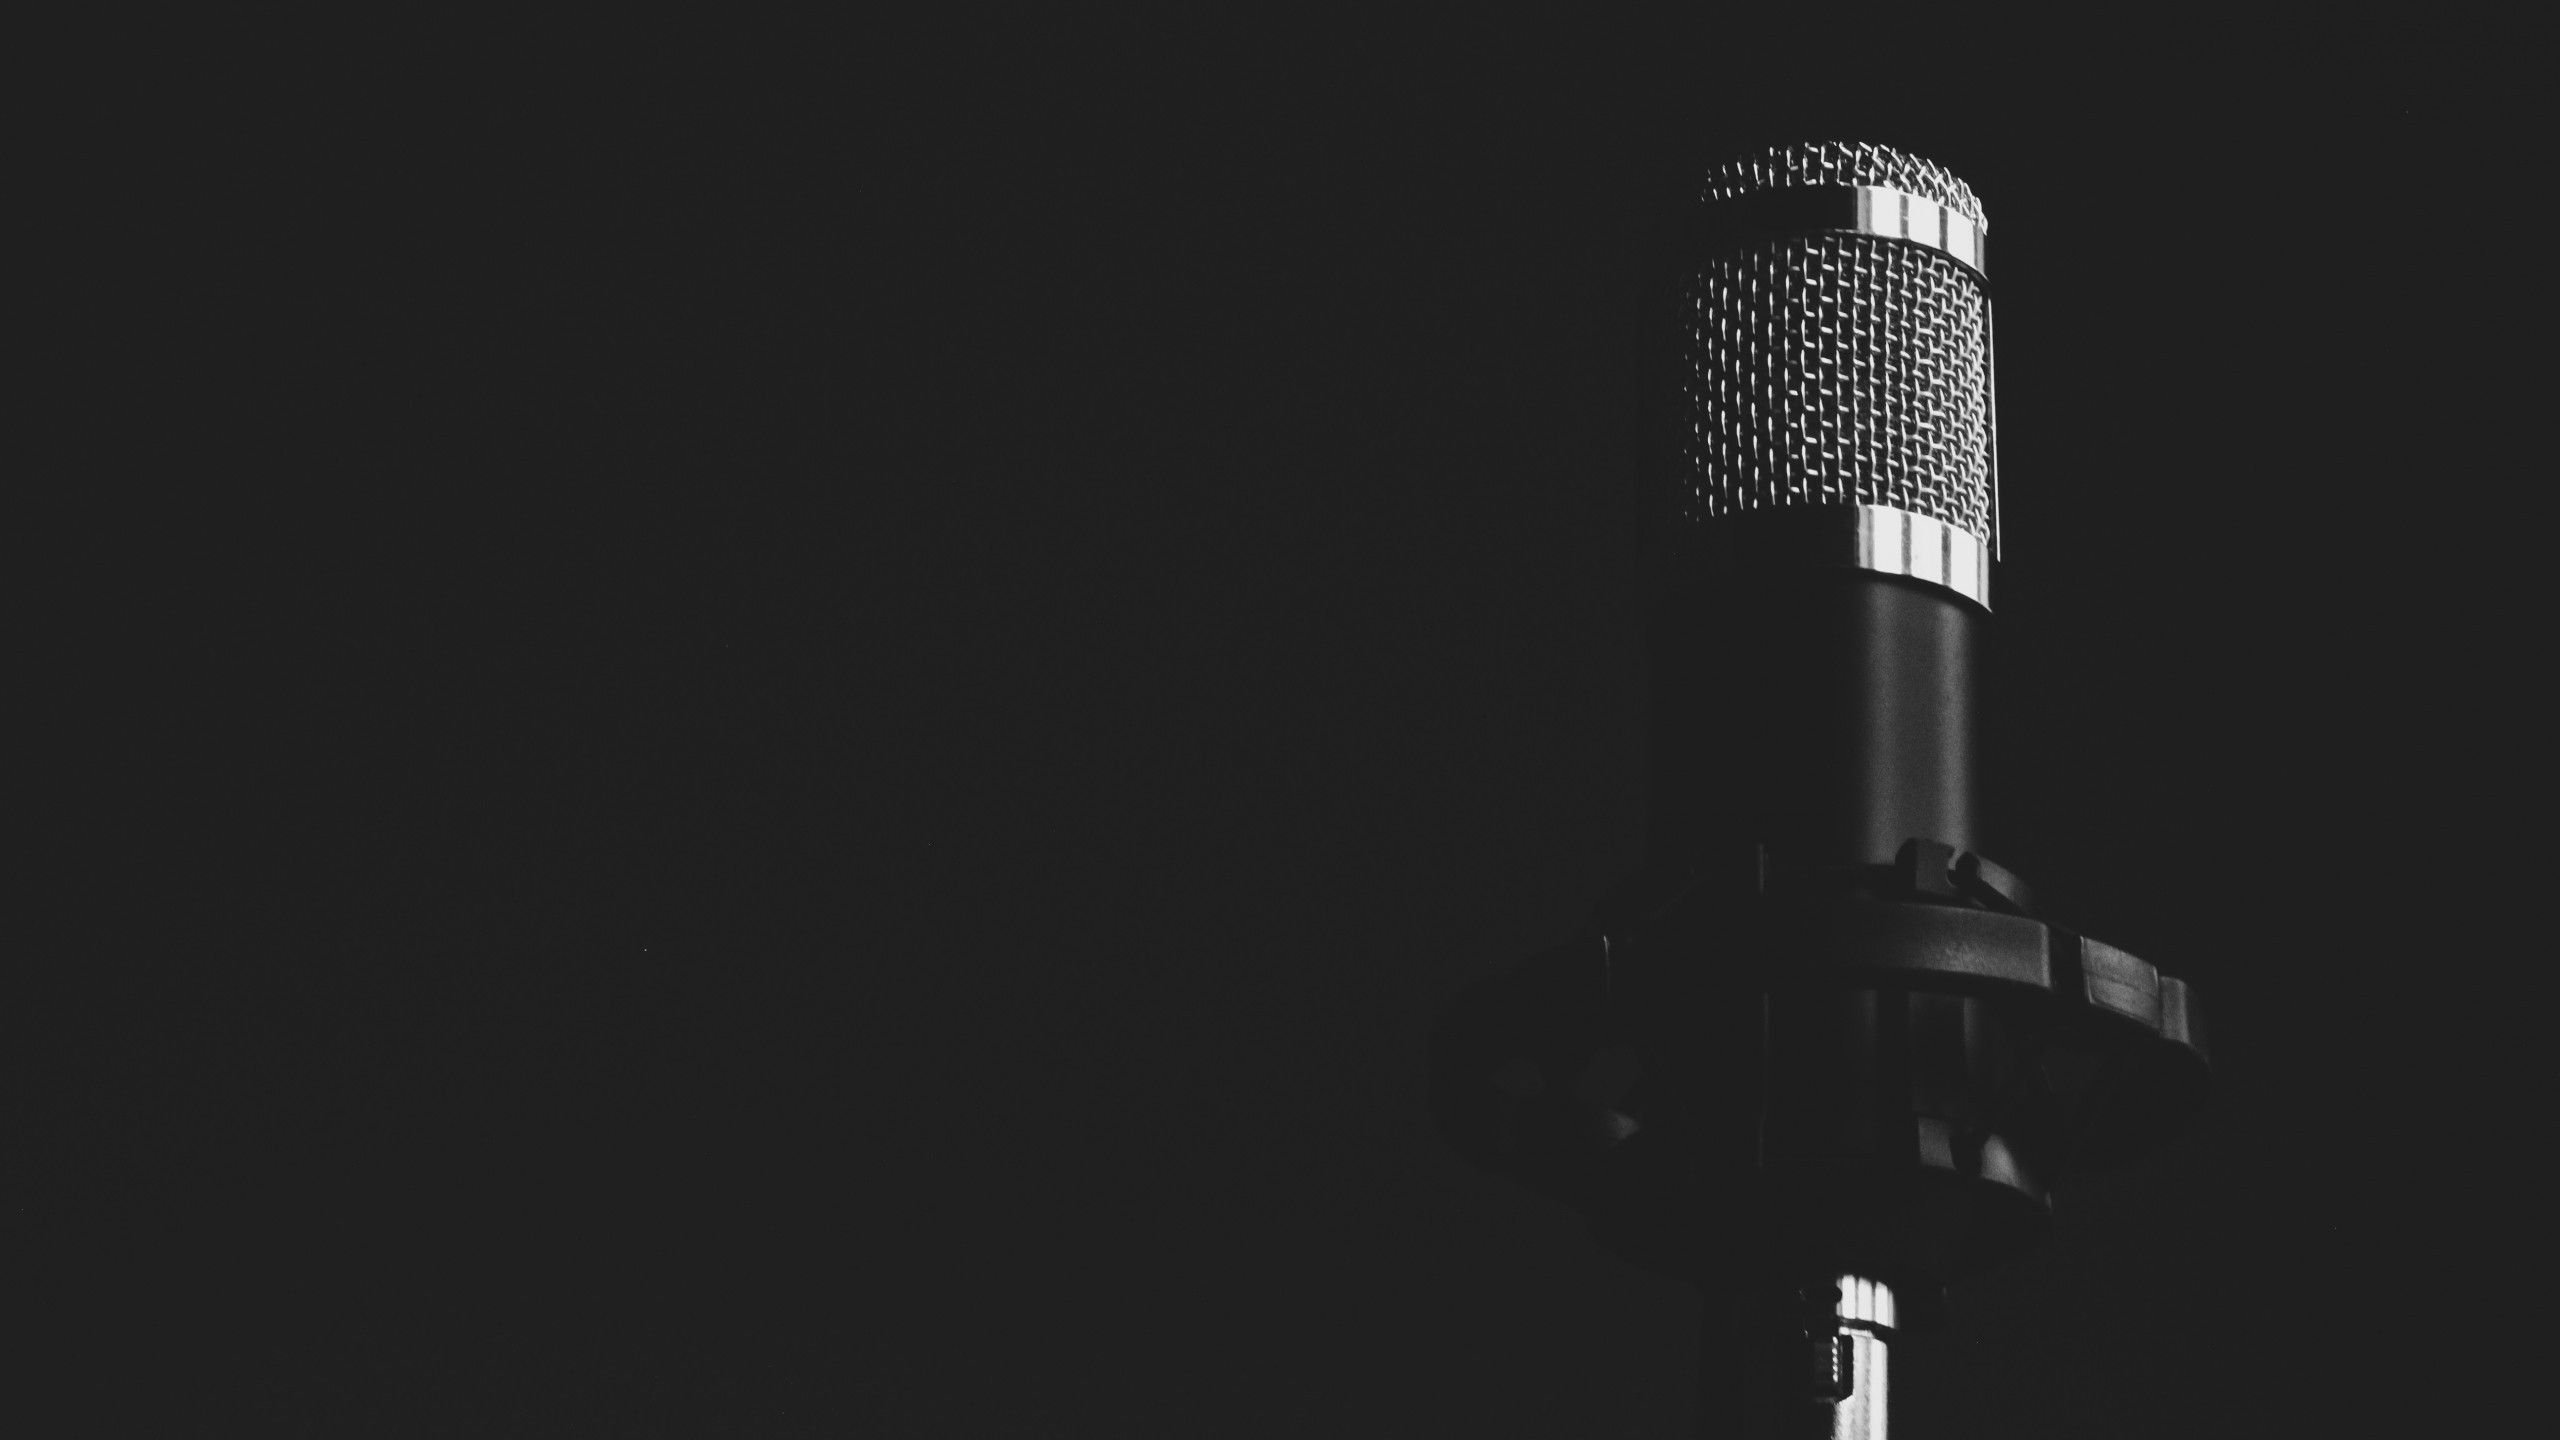 Download 2560x1440 Microphone, Monochrome, Music, Recording, Stand Wallpaper for iMac 27 inch